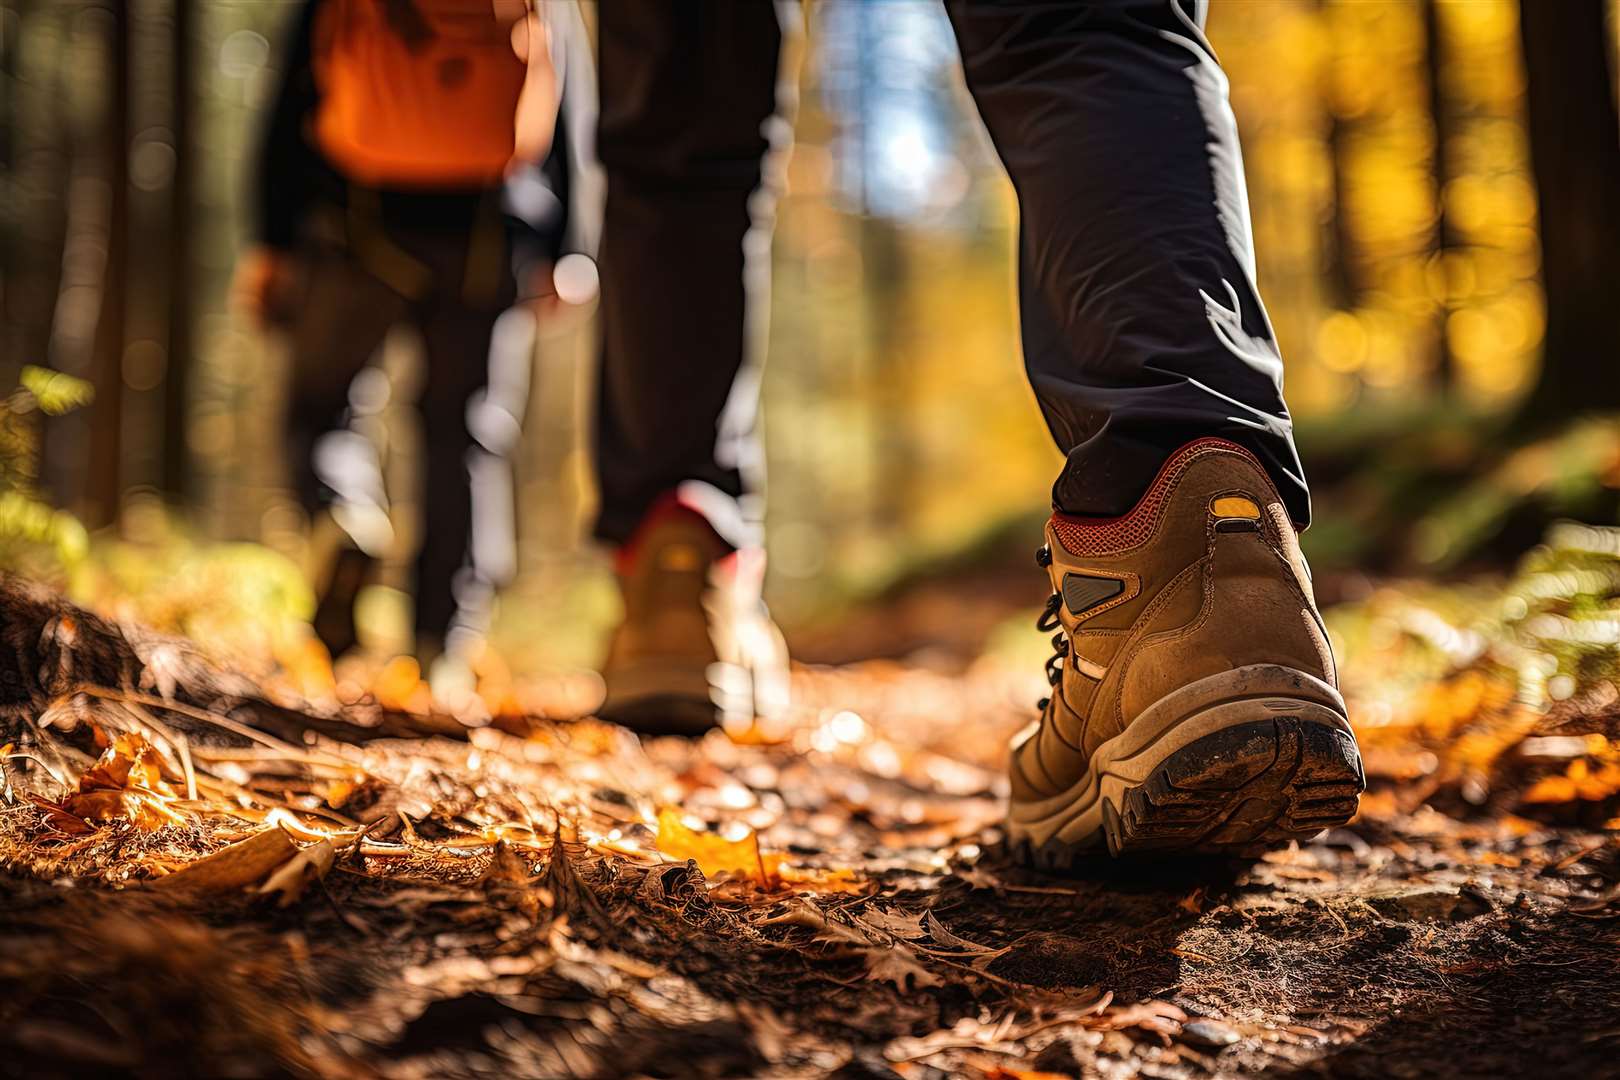 Get your walking boots on and head outdoors.